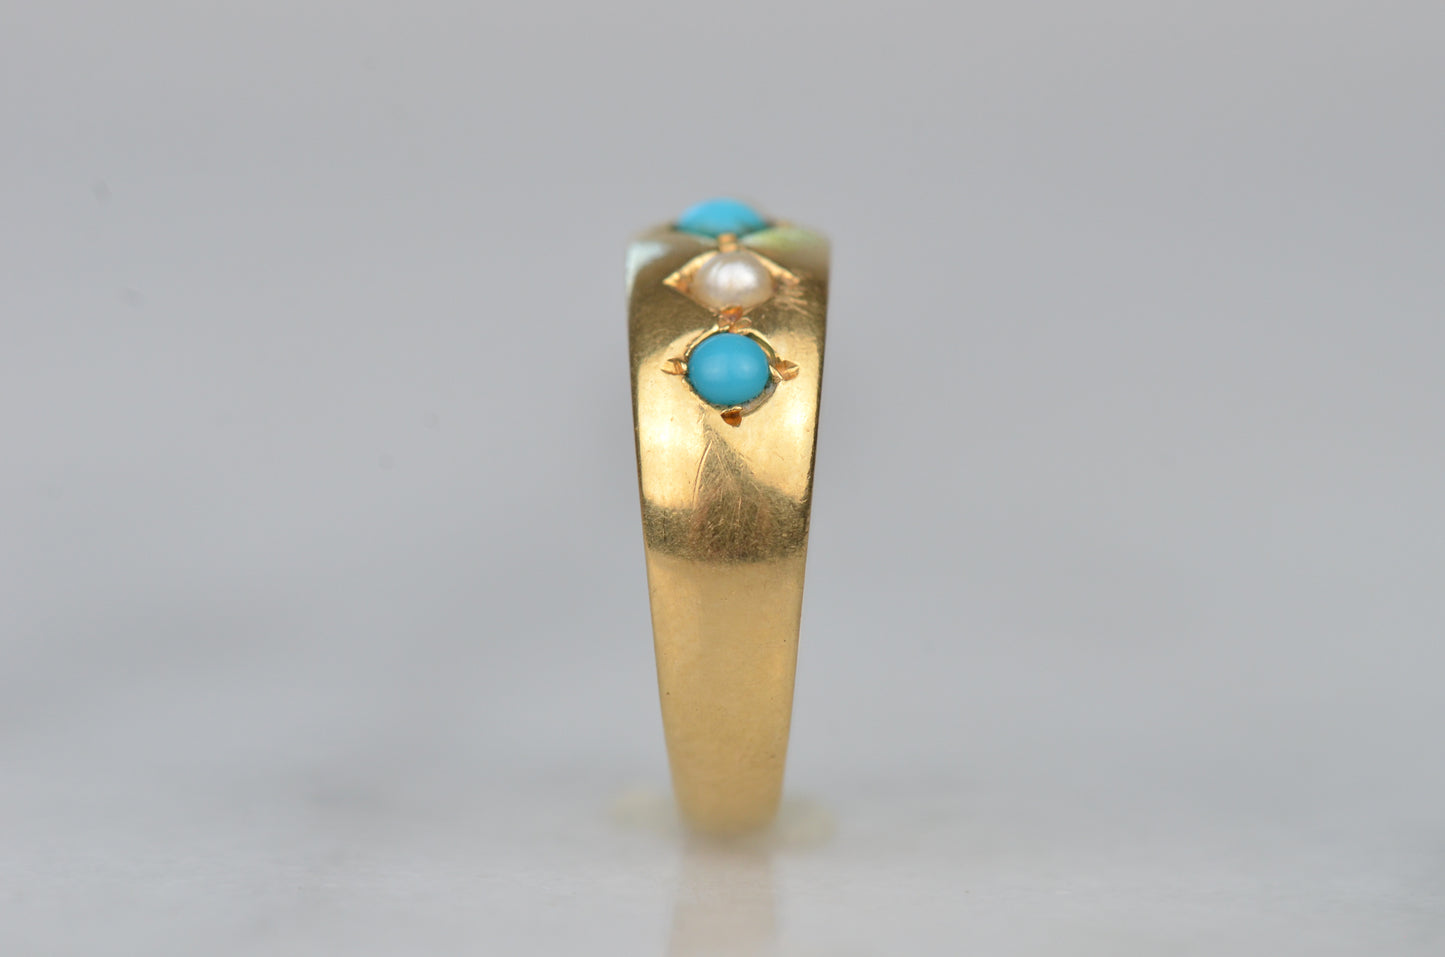 Elegant Antique Turquoise and Pearl Ring